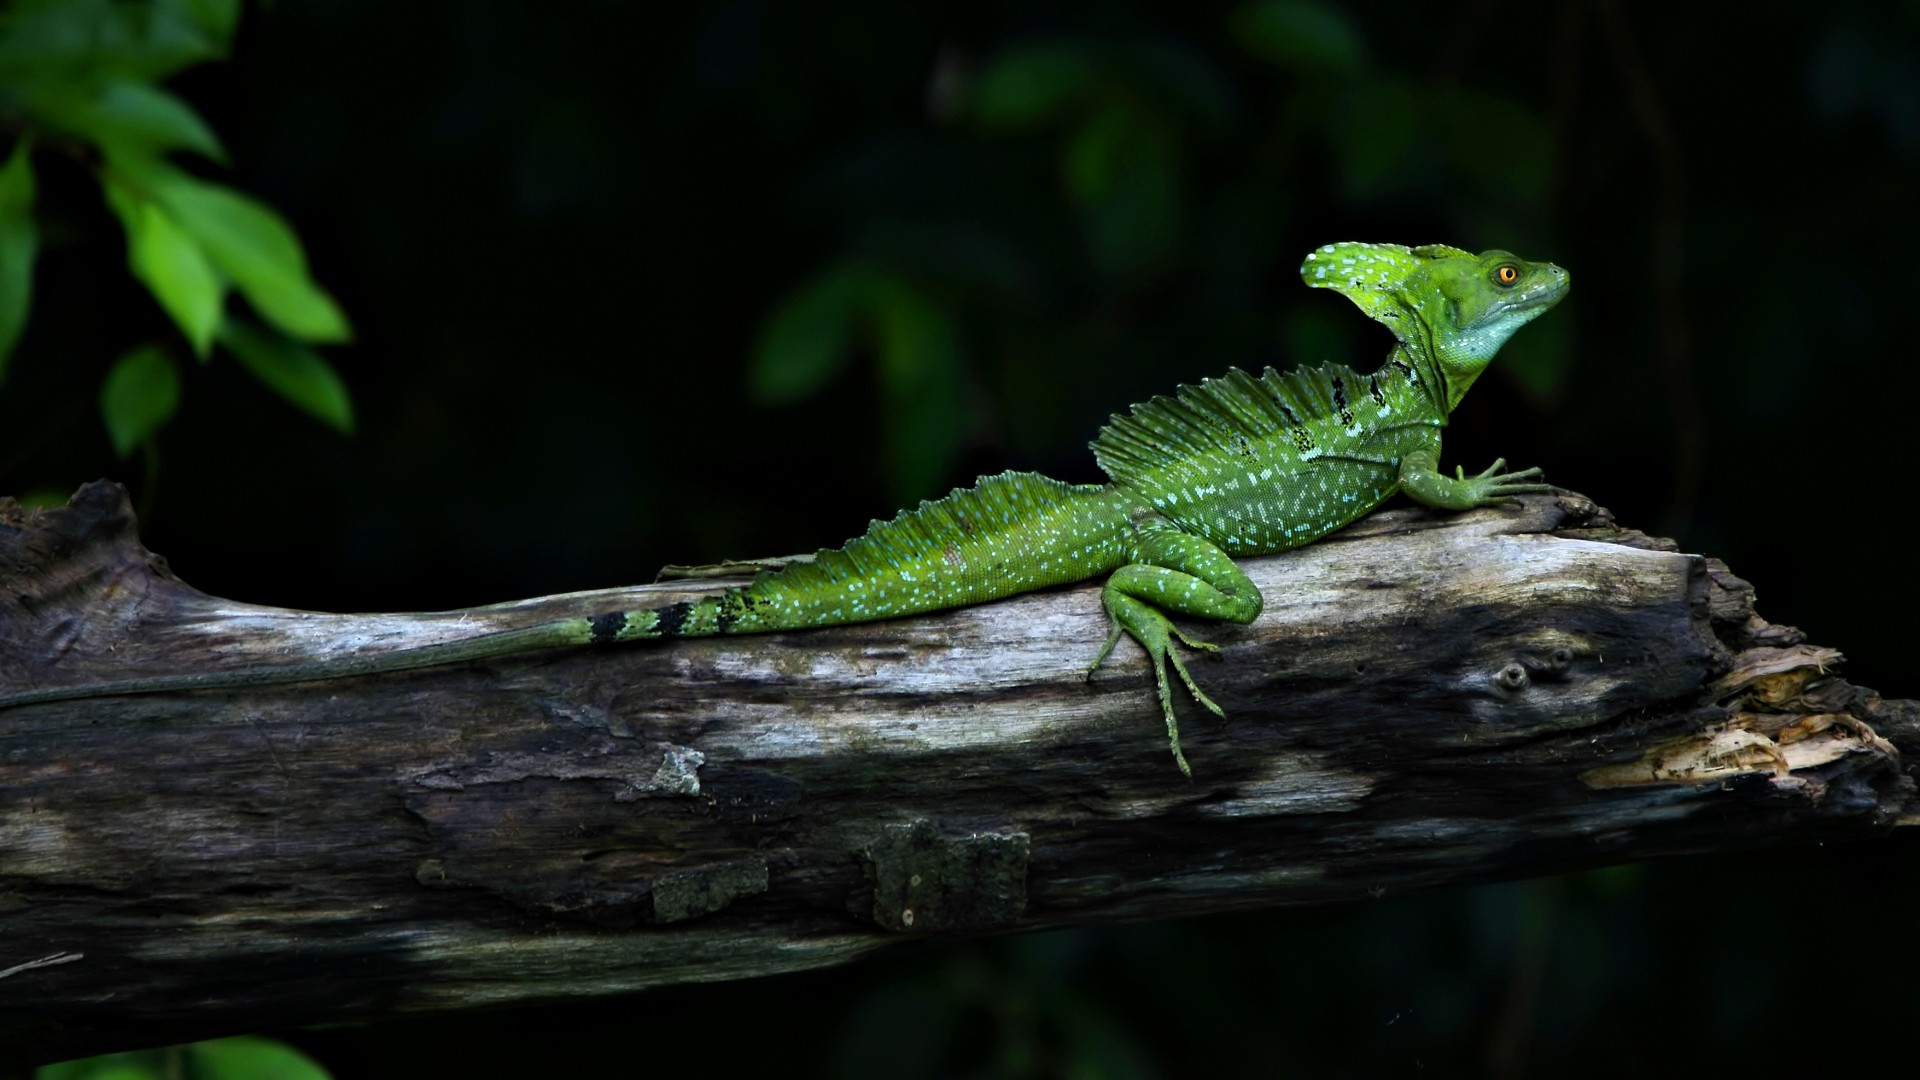 Download the following Fantastic Lizard Wallpaper 4280 by clicking the button positioned underneath the "Download Wallpaper" section.